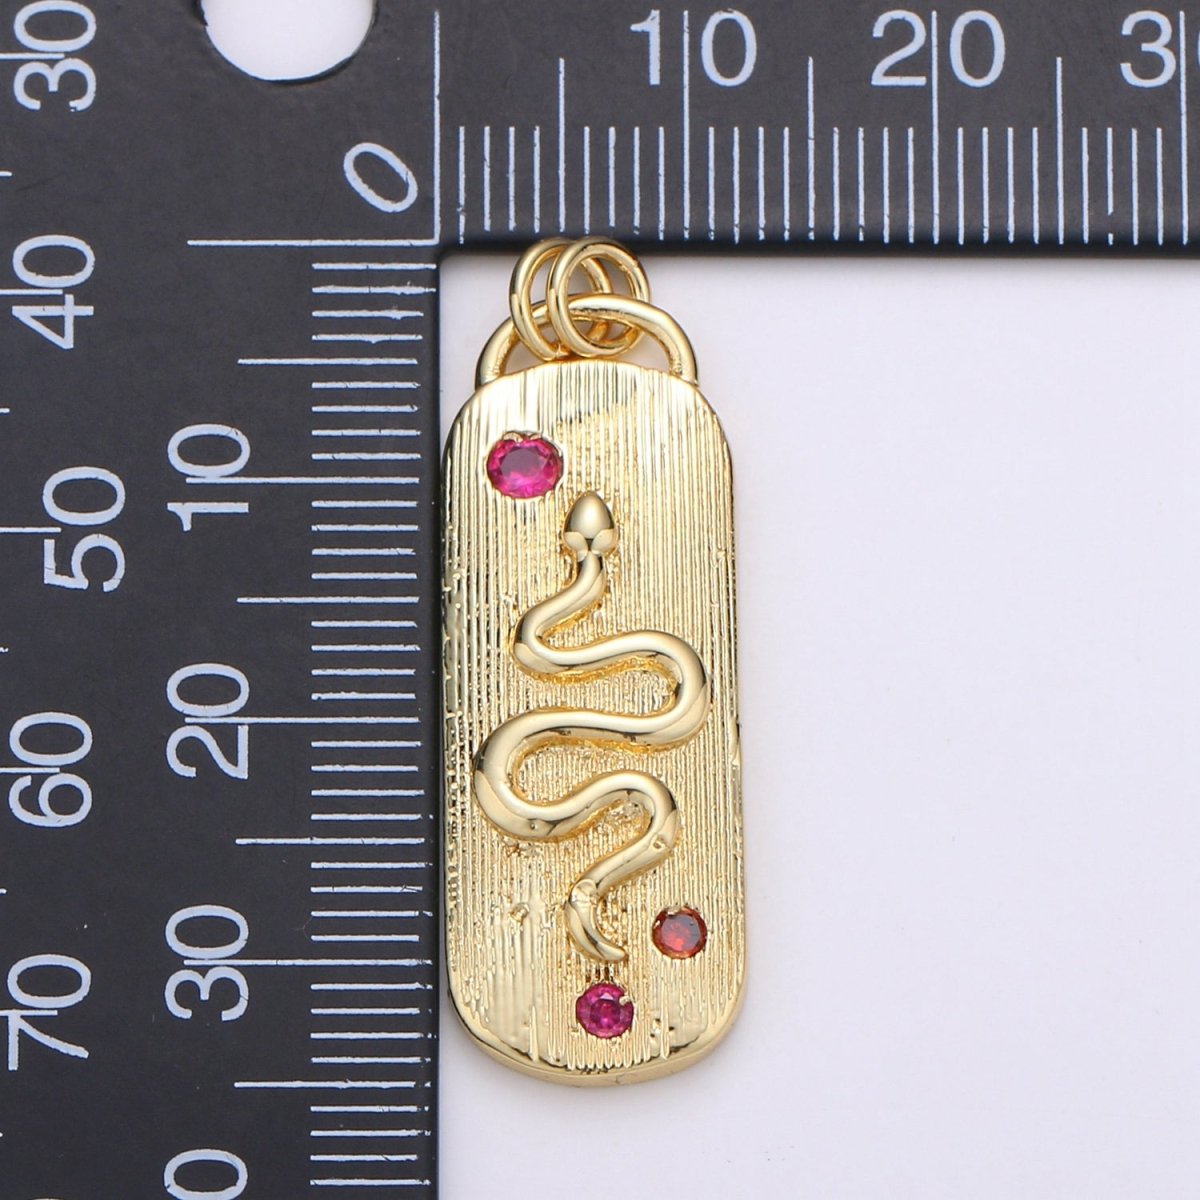 Pink Micro Pave Snake charm, Gold Filled Snake Charm, Animal Charm Gold Serpent Charm Necklace Pendant Finding for Jewelry Making Supply D-905 - DLUXCA